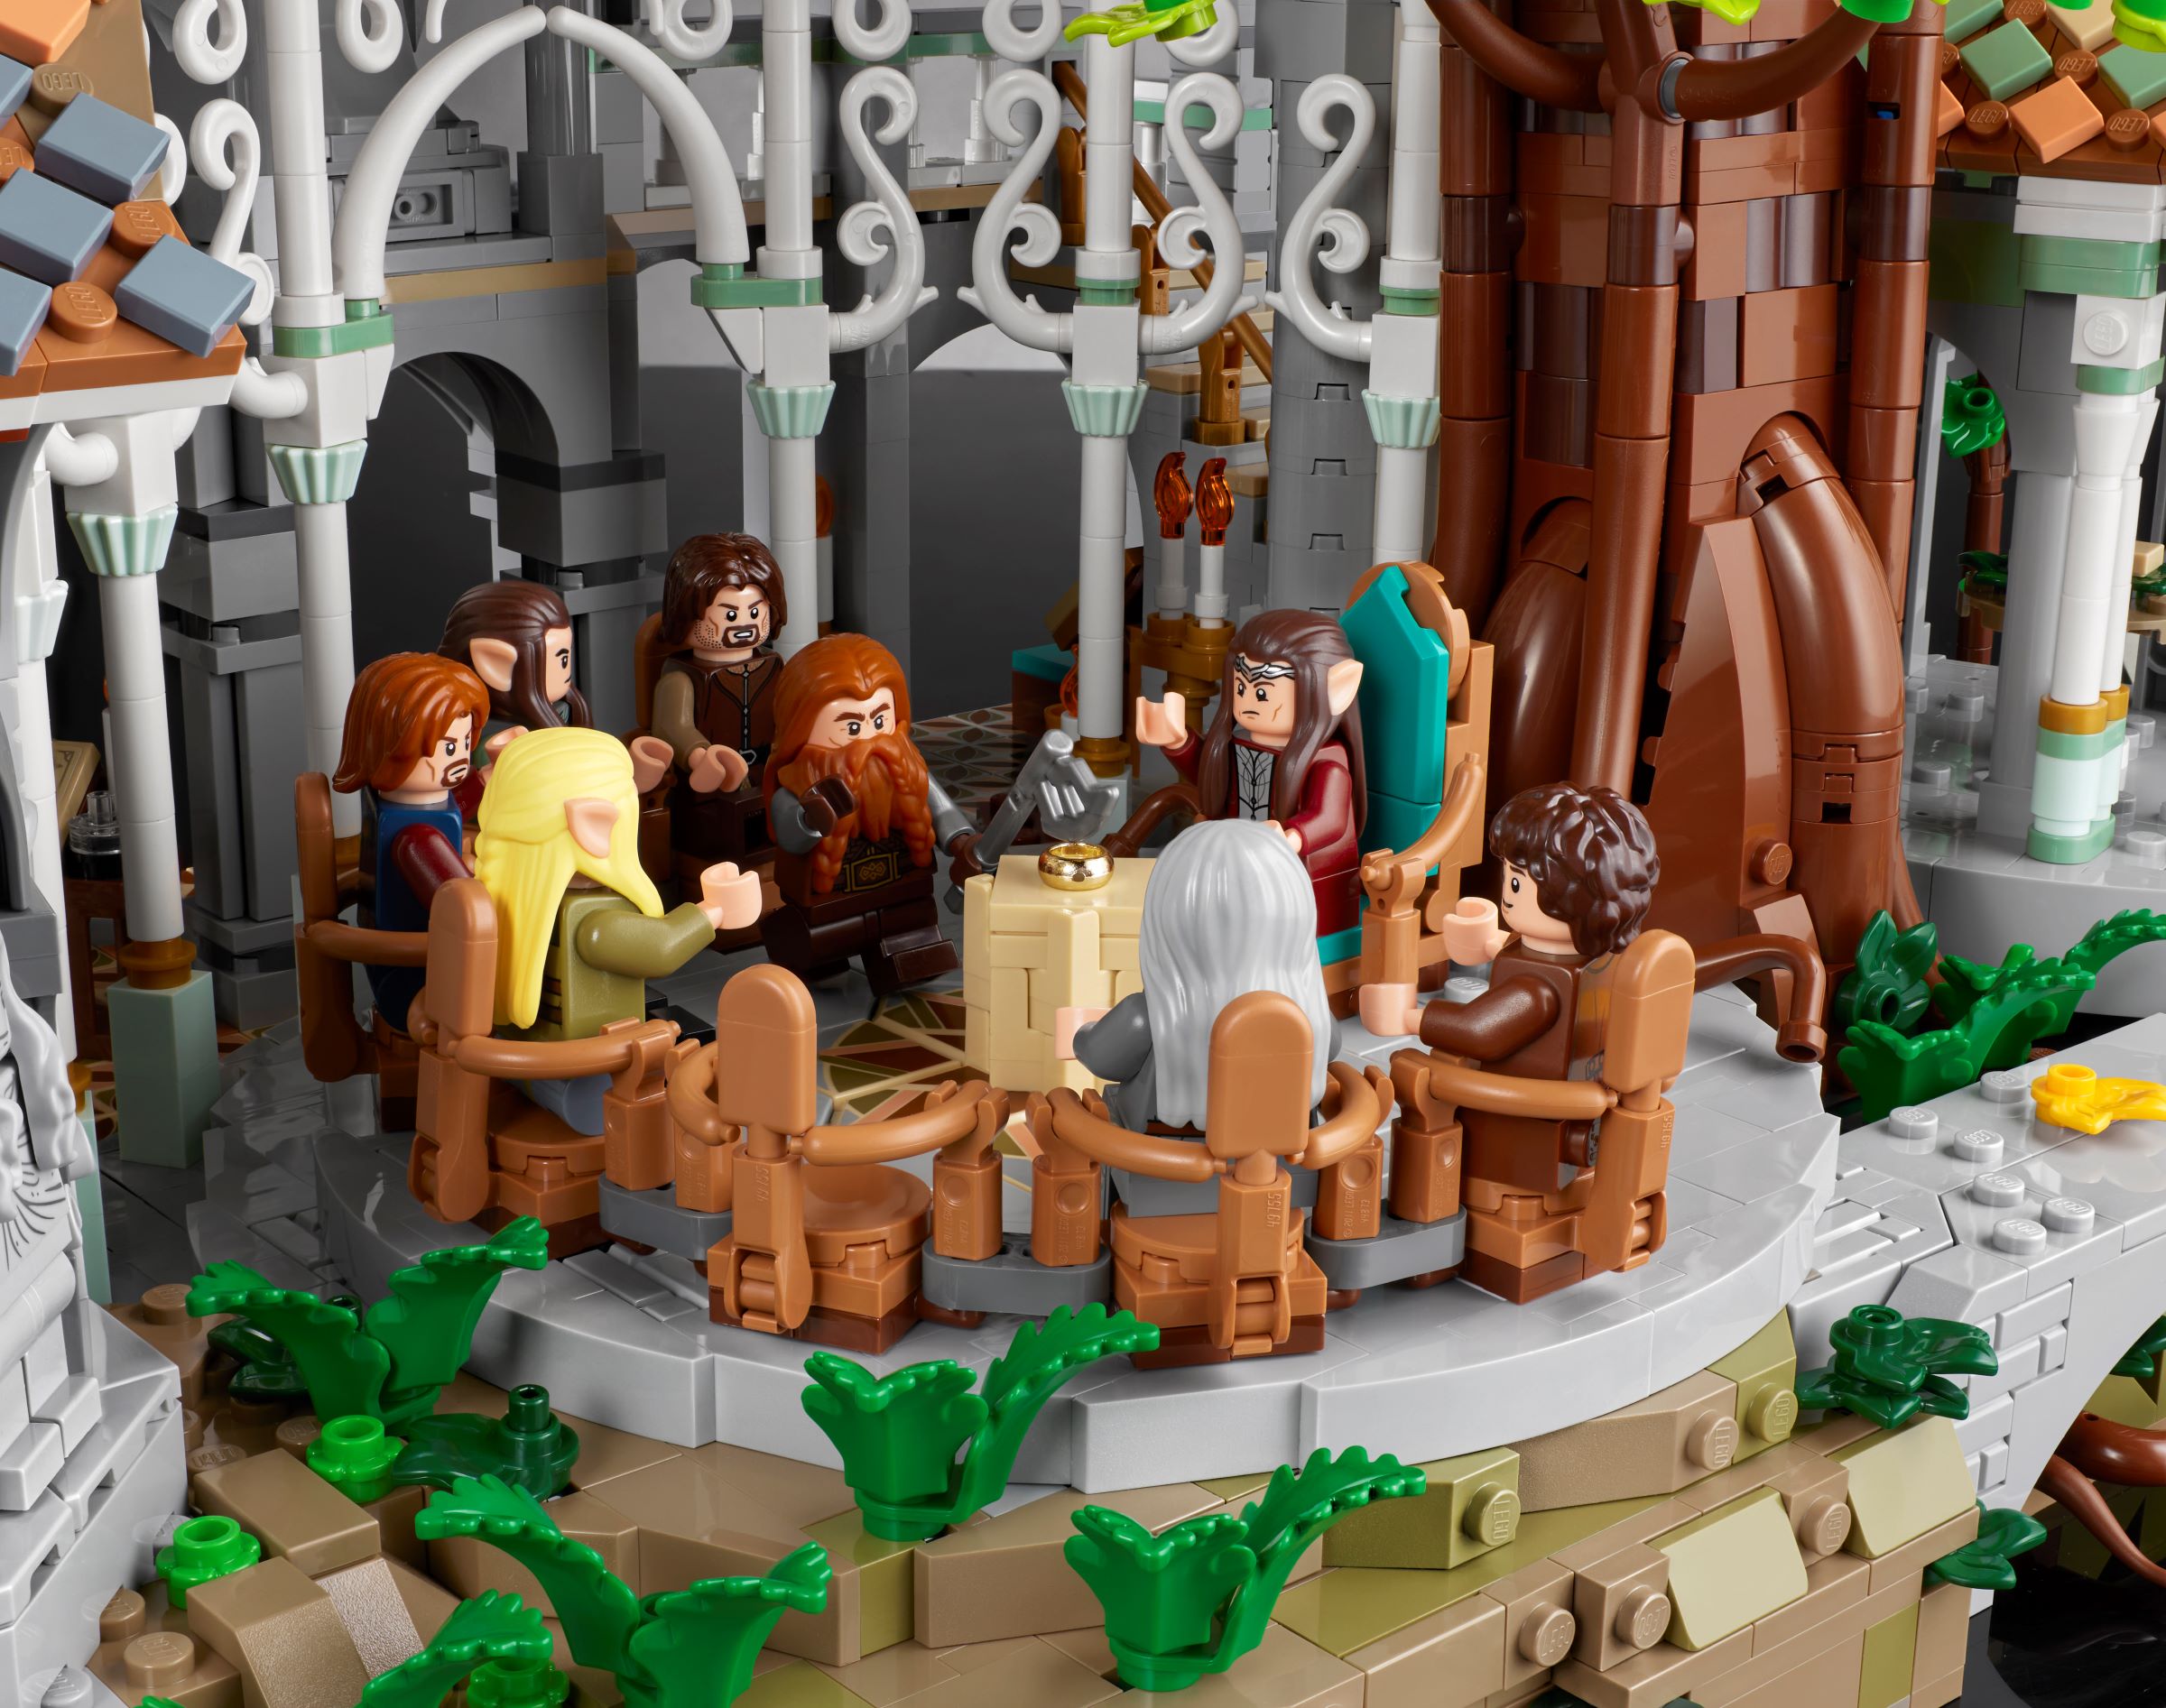 LEGO Lord of the Rings Rivendell Set Revealed